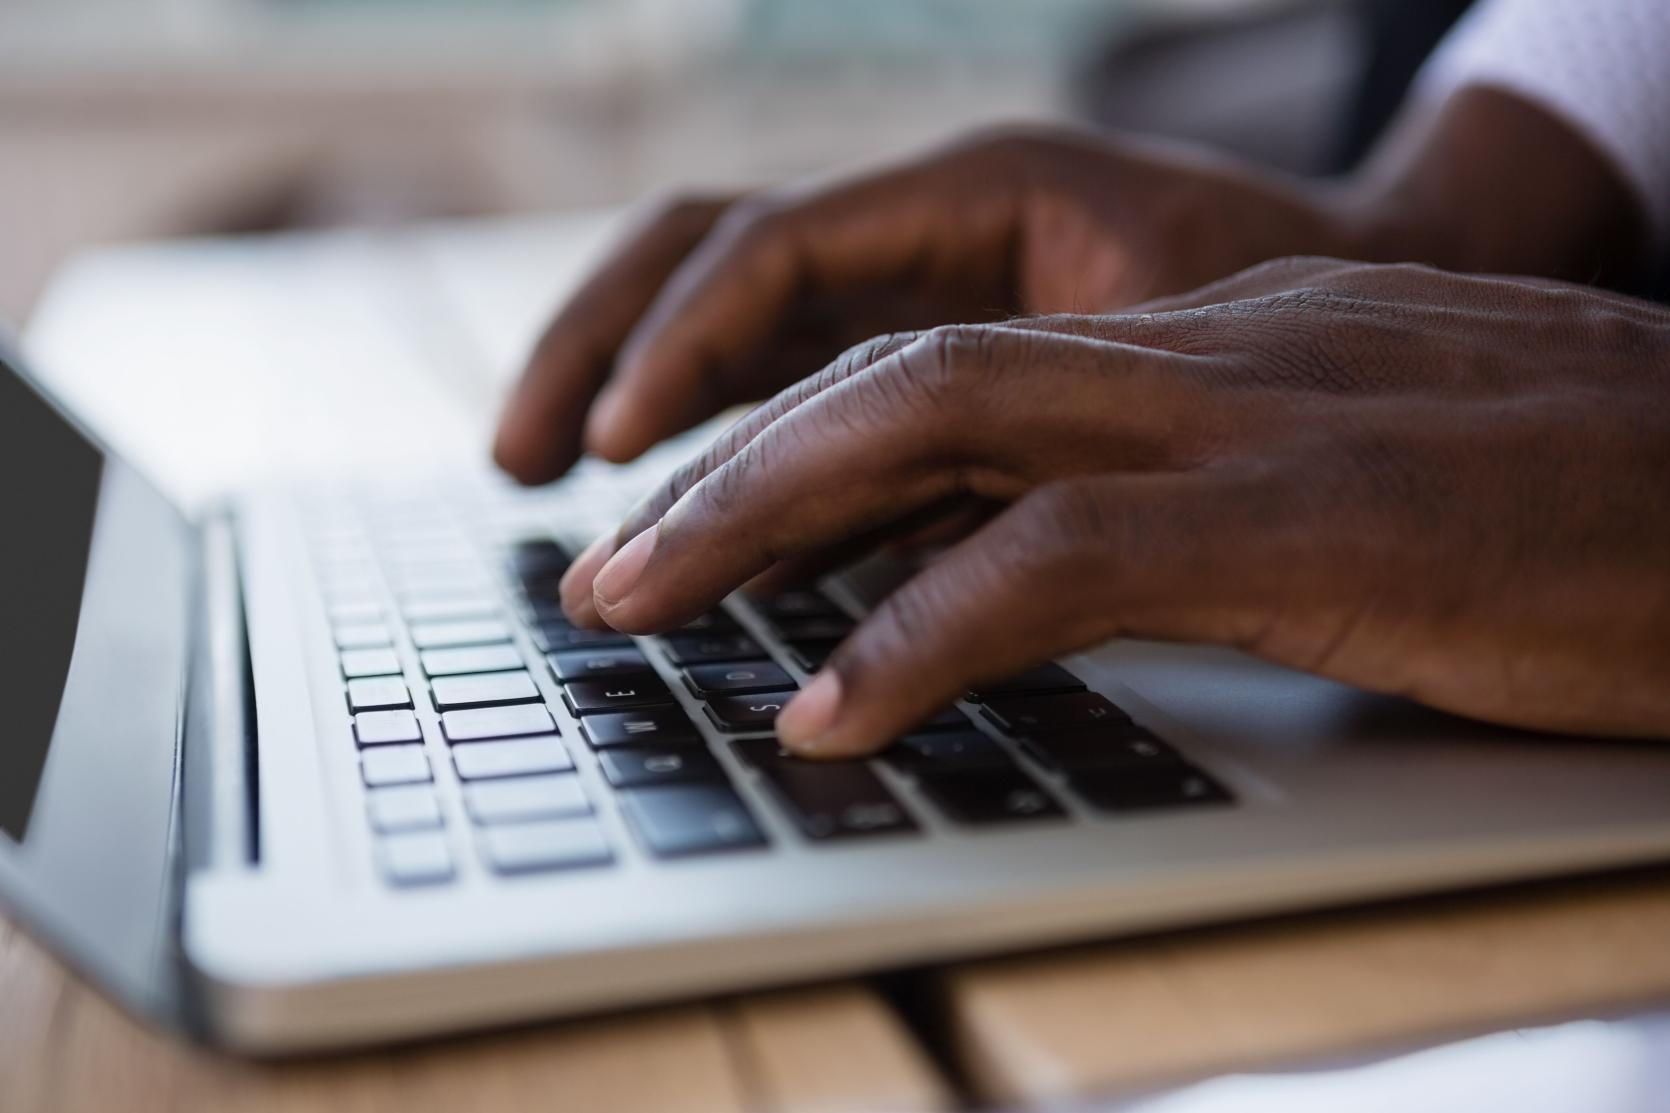 Close up of a Black man's hands typing on a laptop keyboard